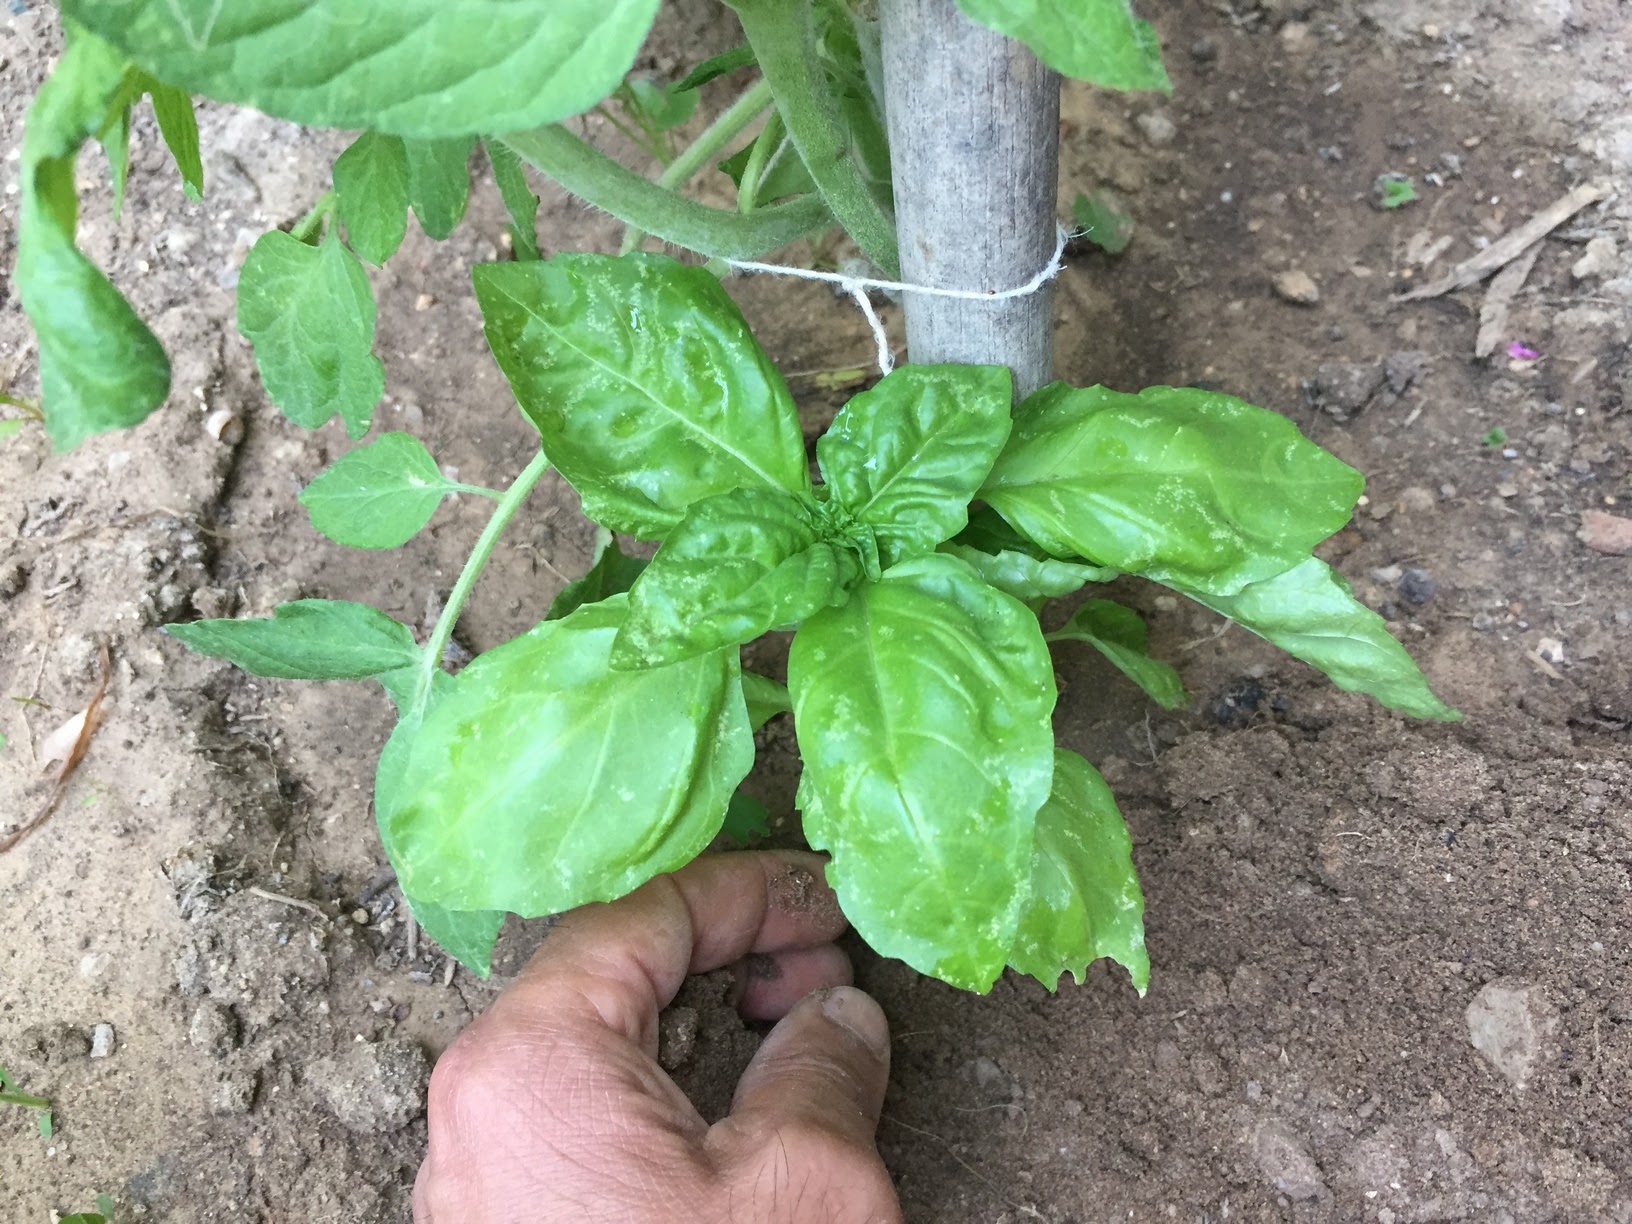 Growing basil and tomatoes together in your vegetable garden make sense as they’re truly a perfect pairing. Basil is a favorable aromatic plant to grow near tomatoes